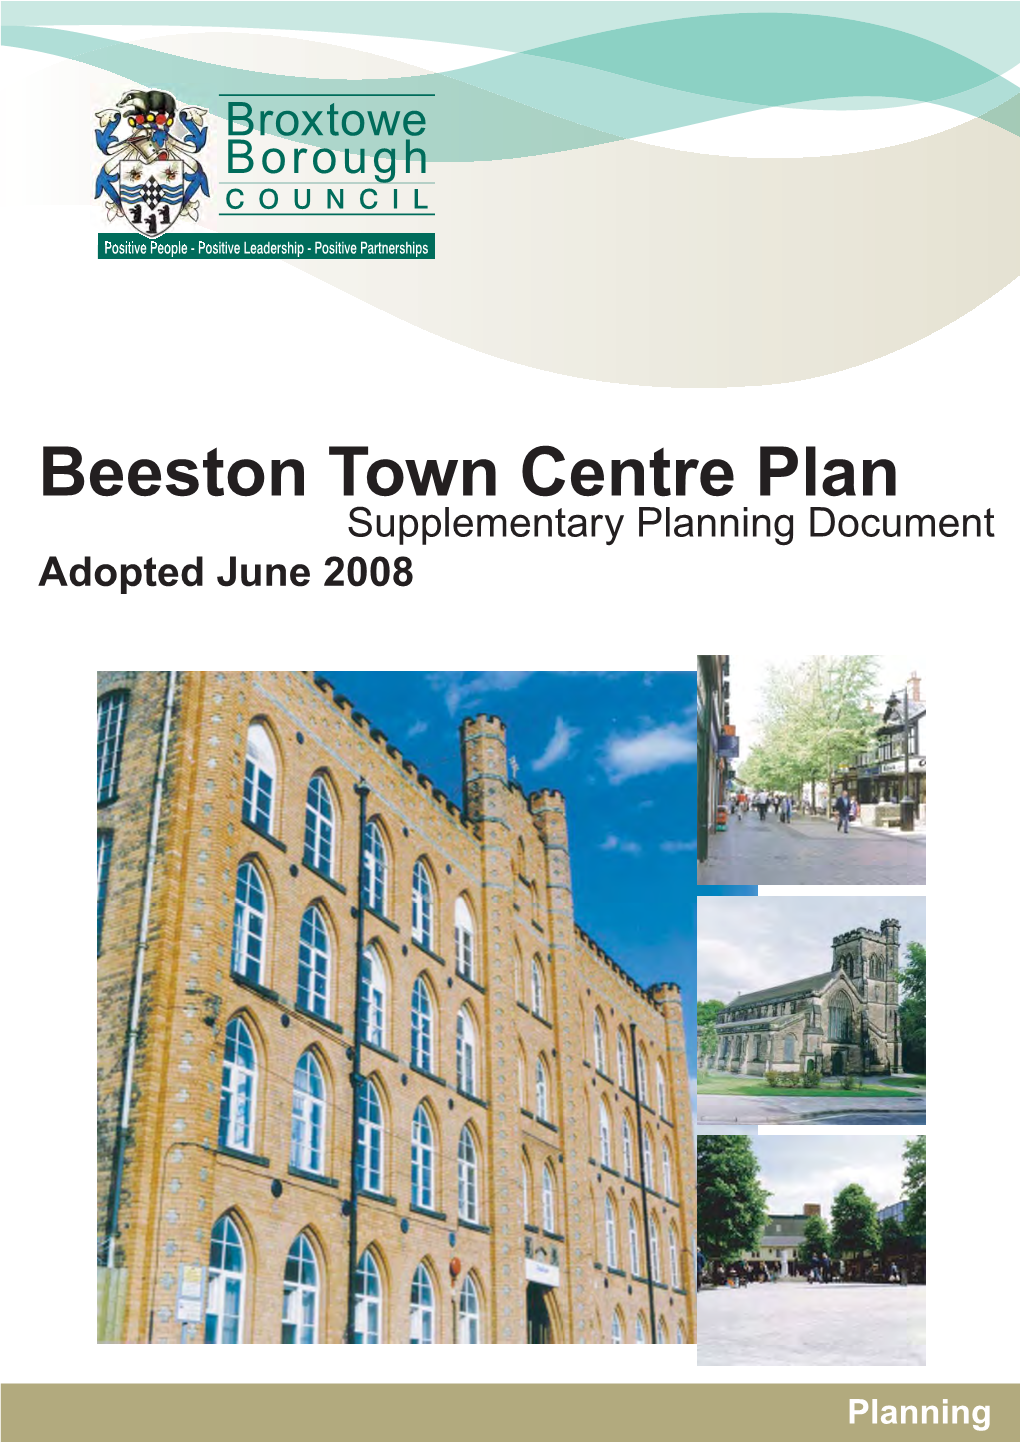 Beeston Town Centre Plan Supplementary Planning Document Adopted June 2008